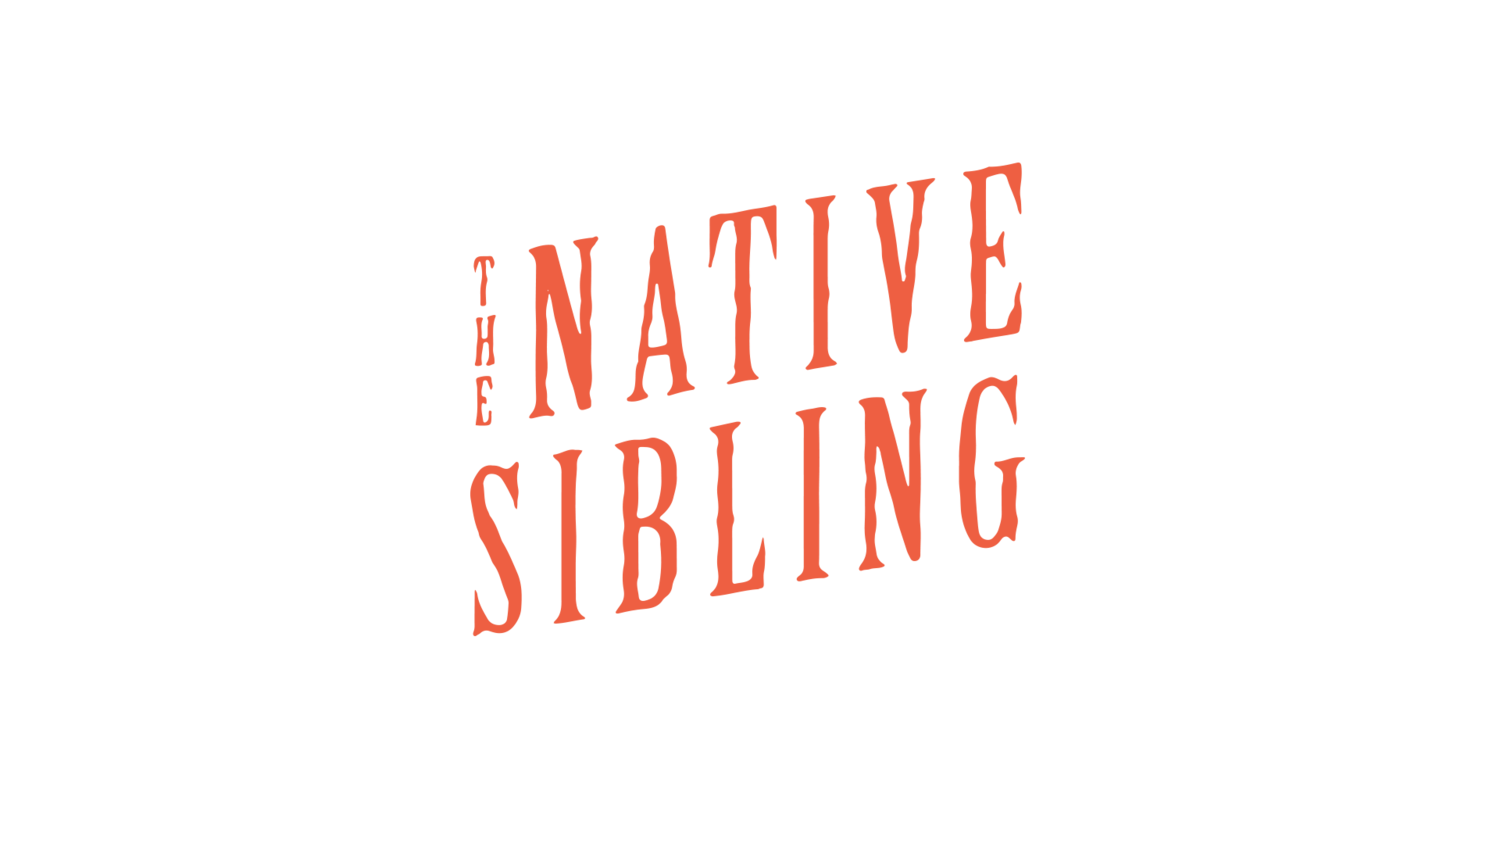 The Native Sibling